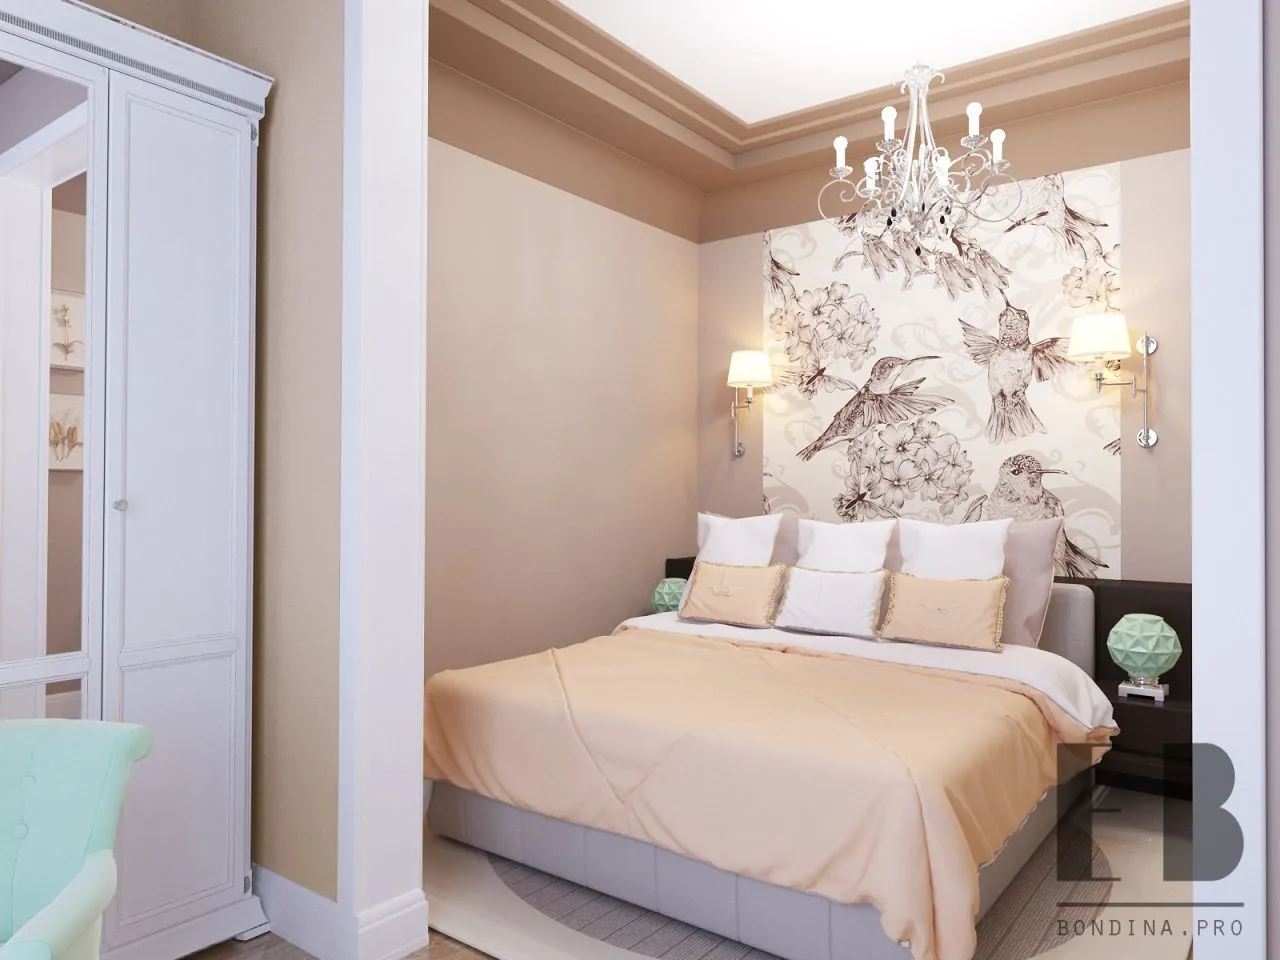 Beautiful Shared Master Bedroom and Nursery with painted birds and flowers in the wall